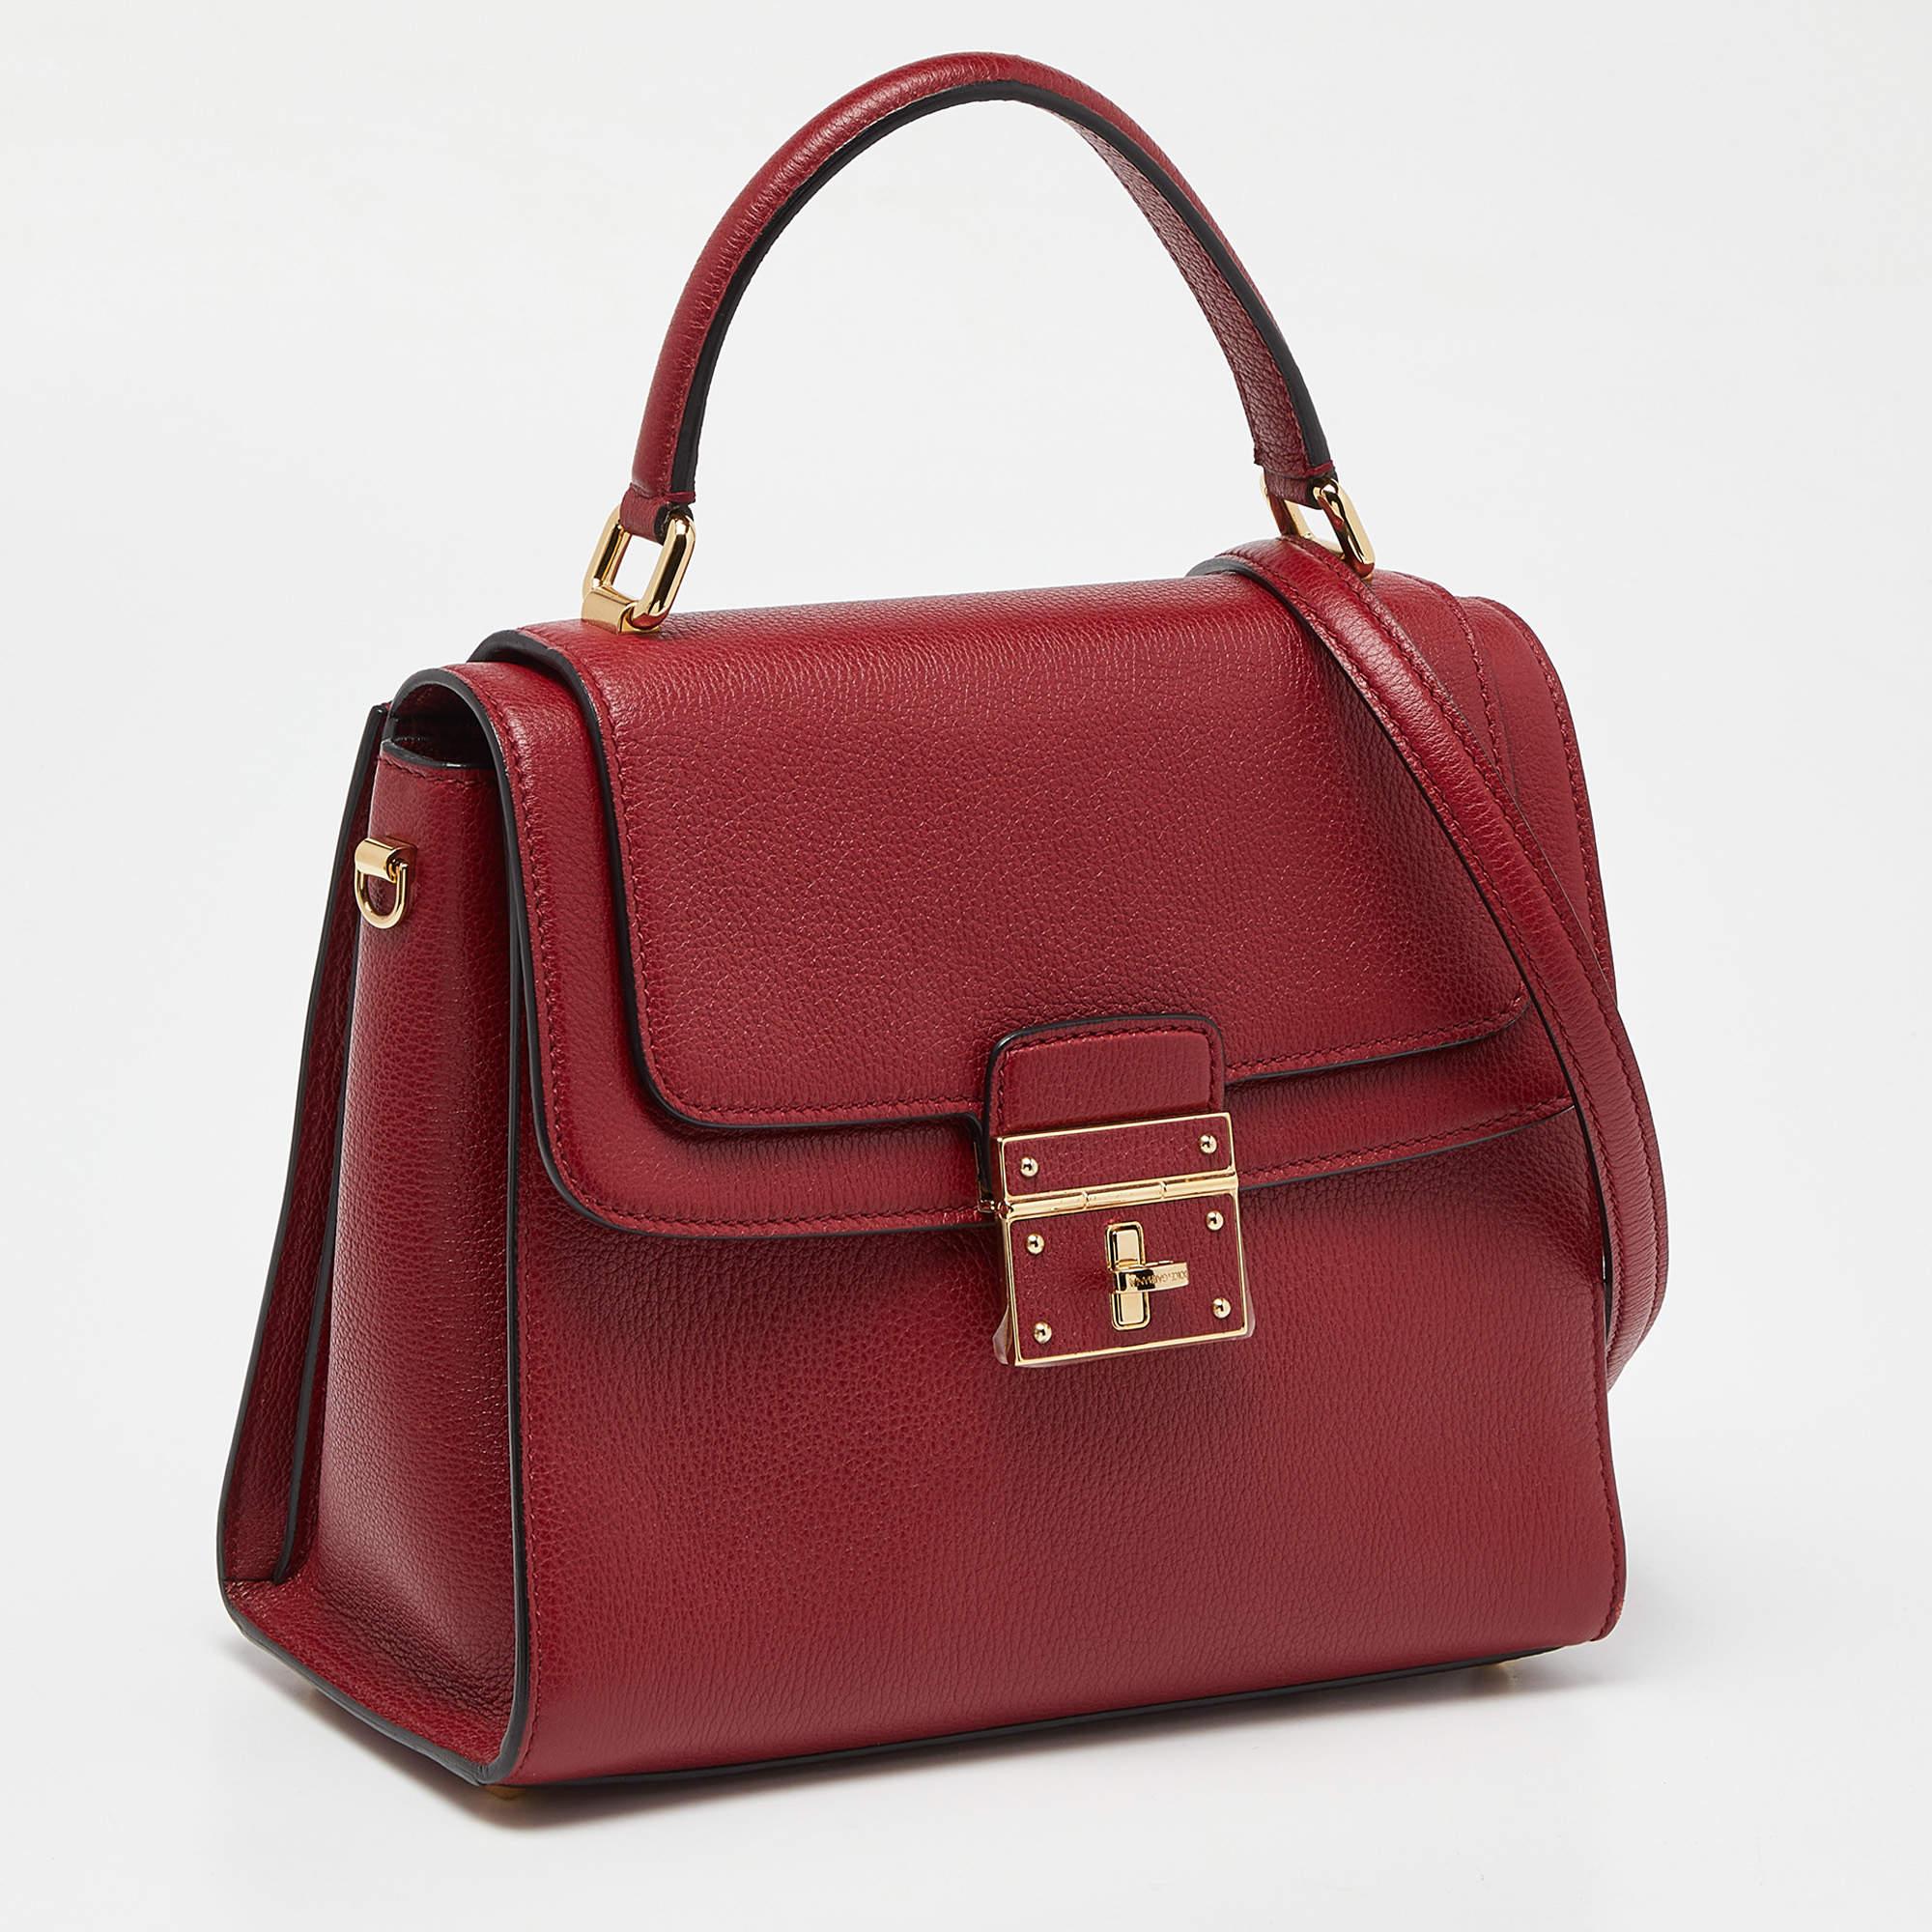 This Dolce & Gabbana bag, made from leather in a gorgeous red, is a picture of sophistication. While the roomy interior offers ample space, the top handle allows you to carry it with much elegance.

